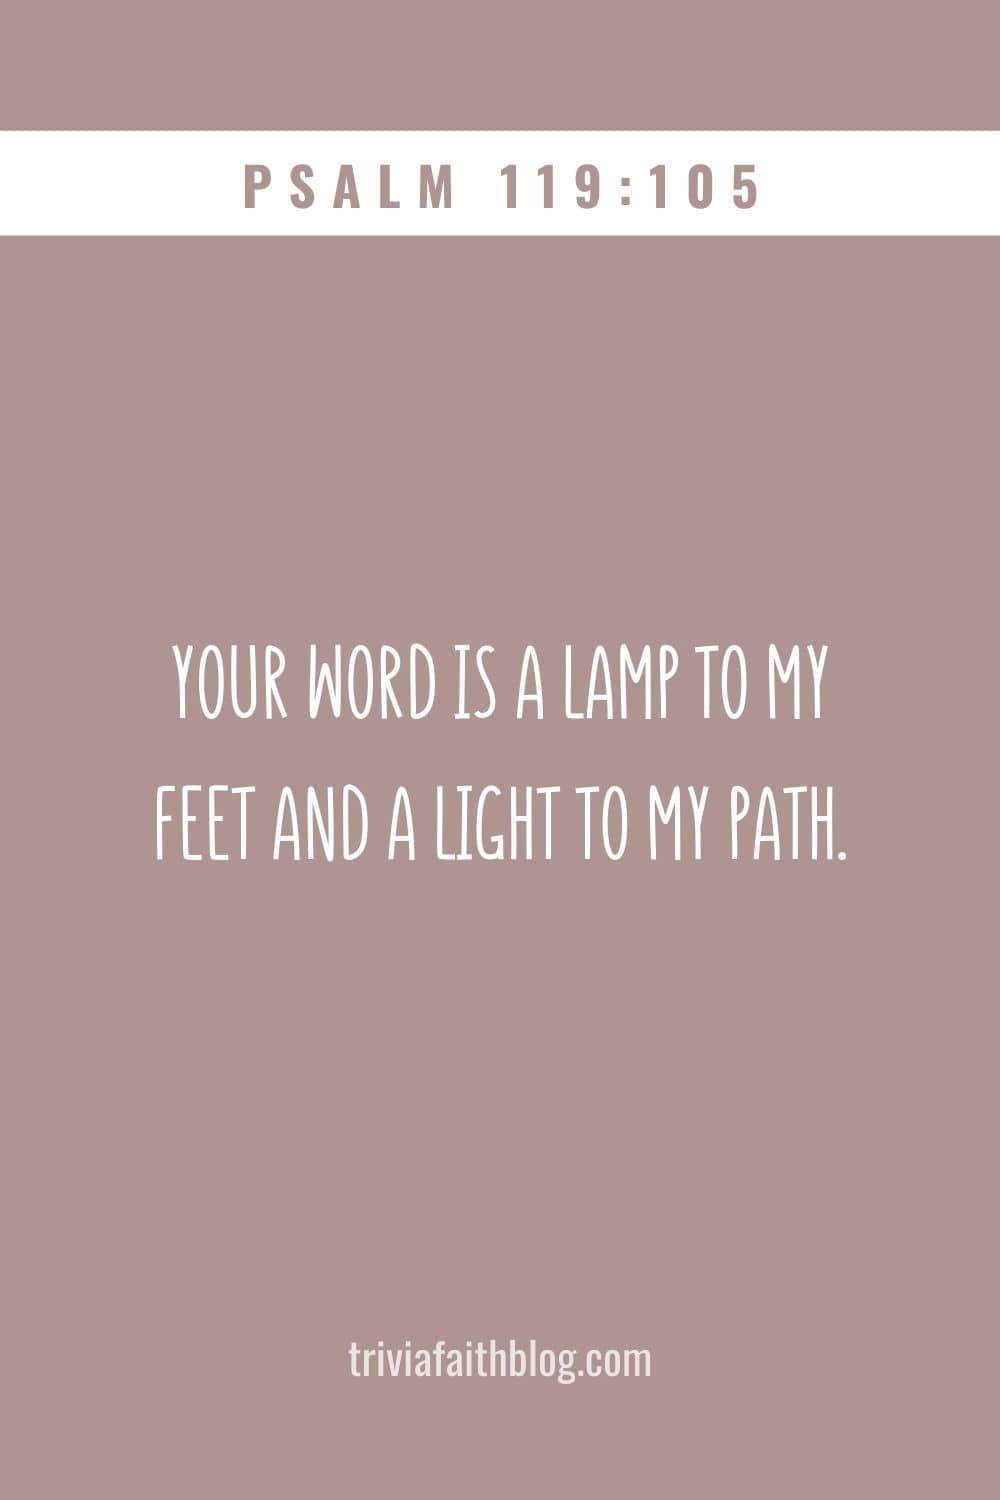 Your word is a lamp to my feet and a light to my path